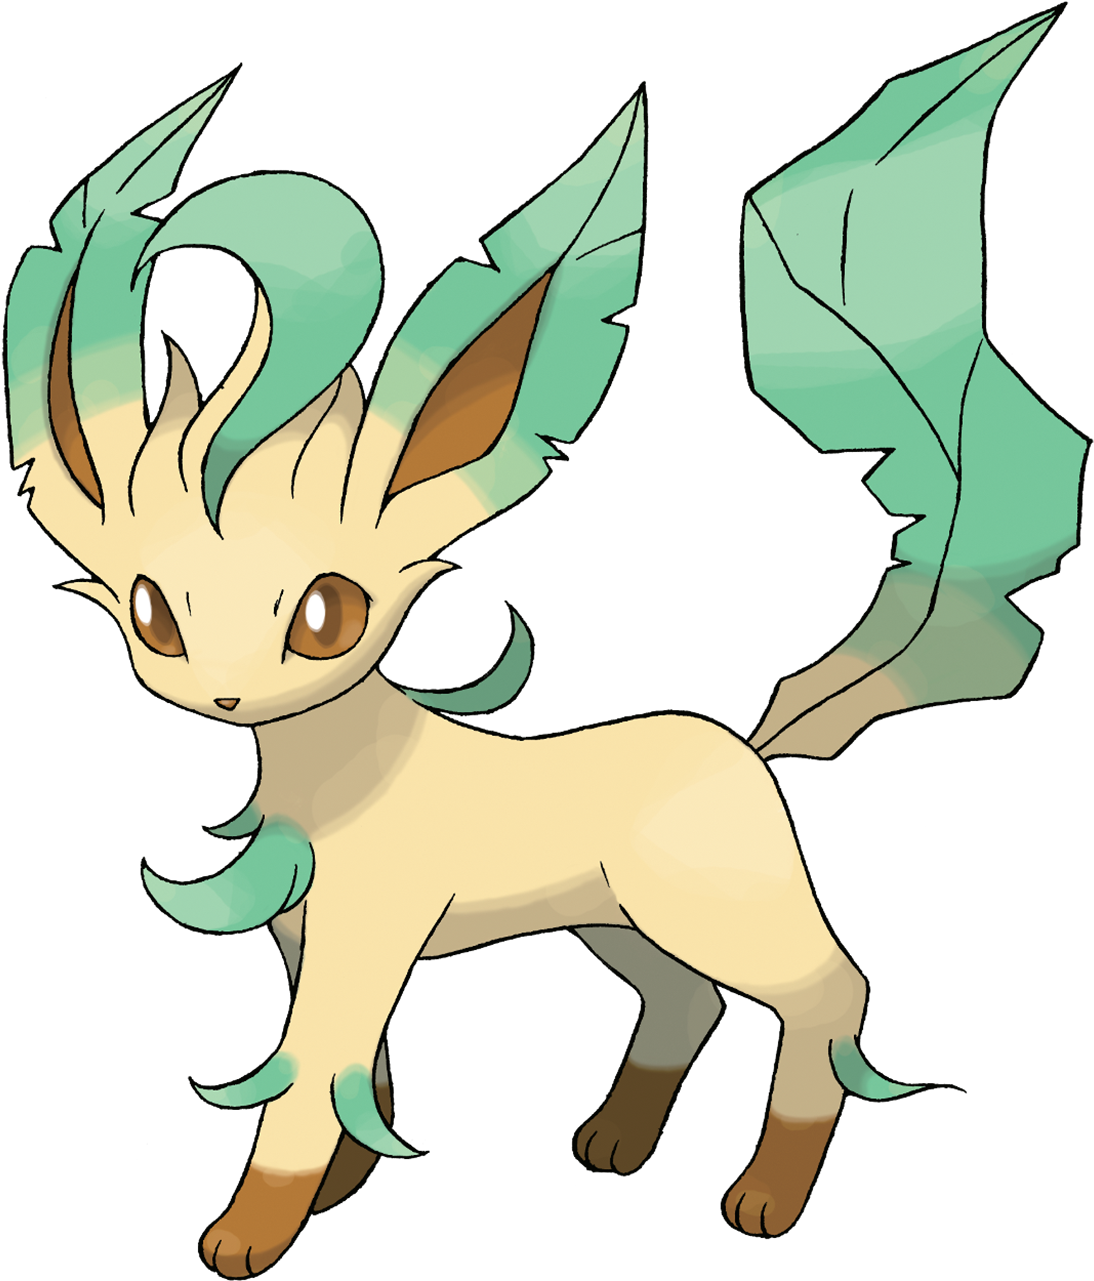 Clumsy, Sweet, Loving, Playful, Caring, Nice, And Overall - Pokemon Eevee Evolution Leafeon (1463x1350)